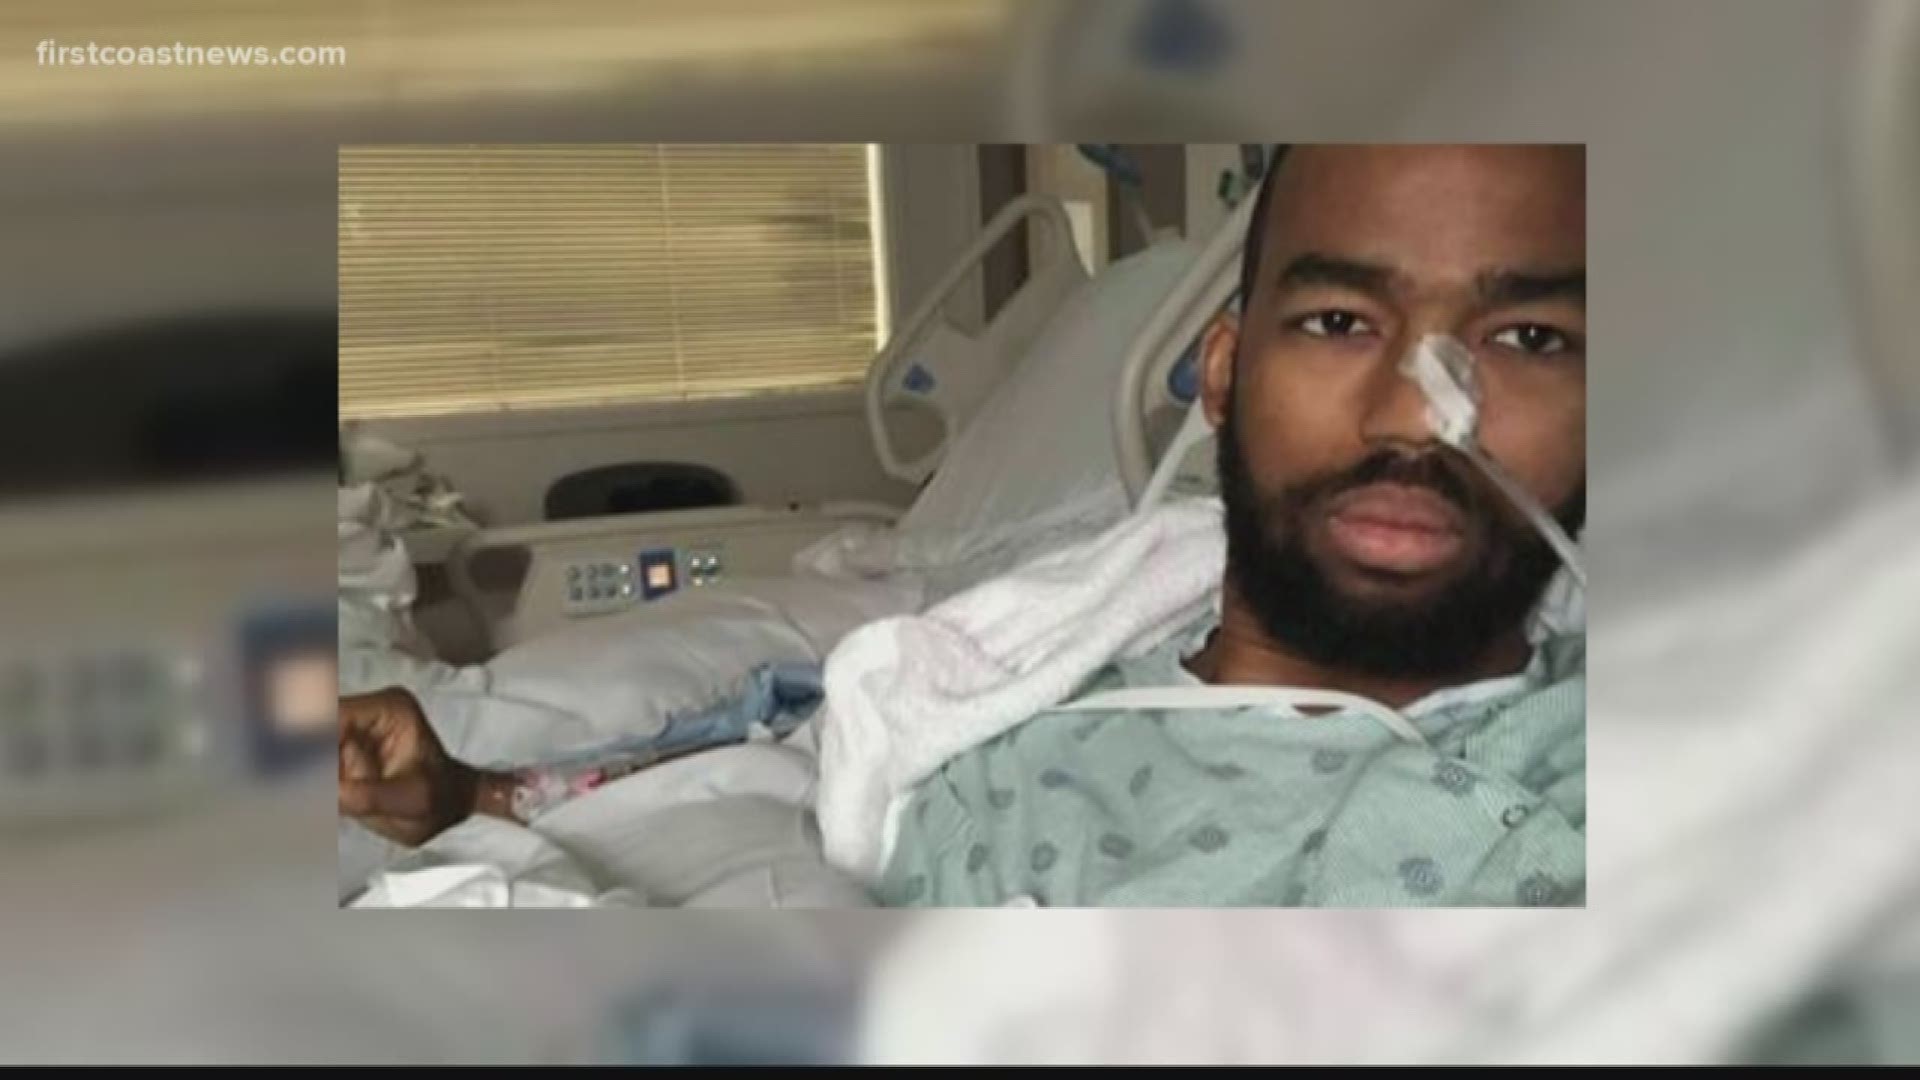 Jordan Chase White, 25, was stabbed by a total stranger near Birdies just before midnight on Sunday. He?s now recovering at the hospital with stab wounds to his liver and kidneys.